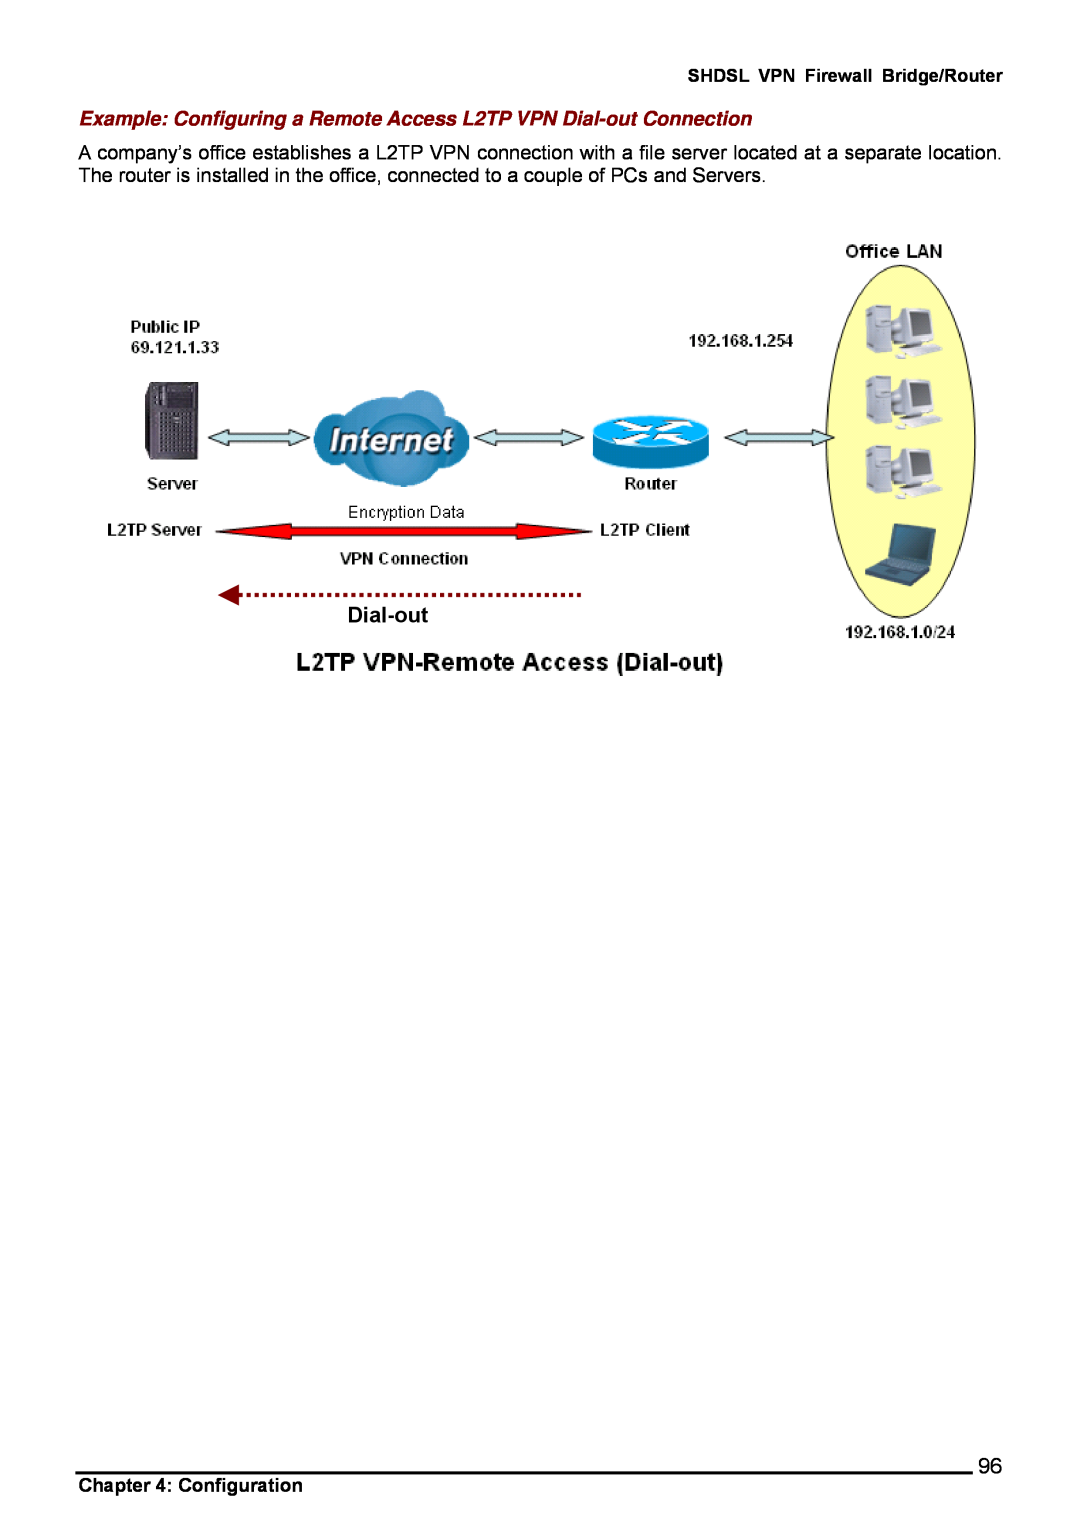 Billion Electric Company 8501 Example Configuring a Remote Access L2TP VPN Dial-out Connection, Configuration 